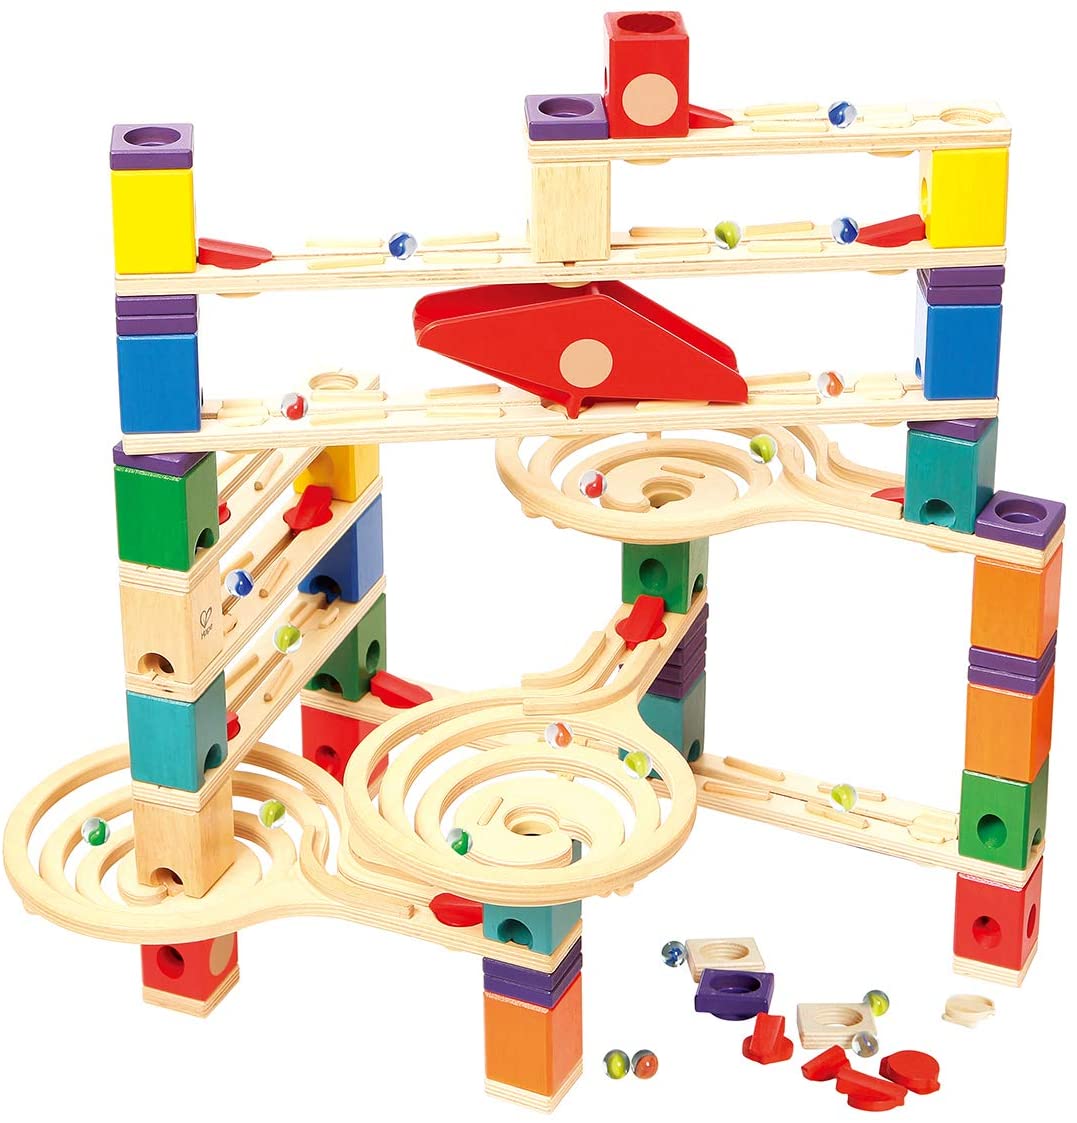 (OPEN BOX) Hape Quadrilla Wooden Marble Run Construction - Vertigo - Quality Time Playing Together Wooden Safe Play - Smart Play for Smart Families,Multicolor